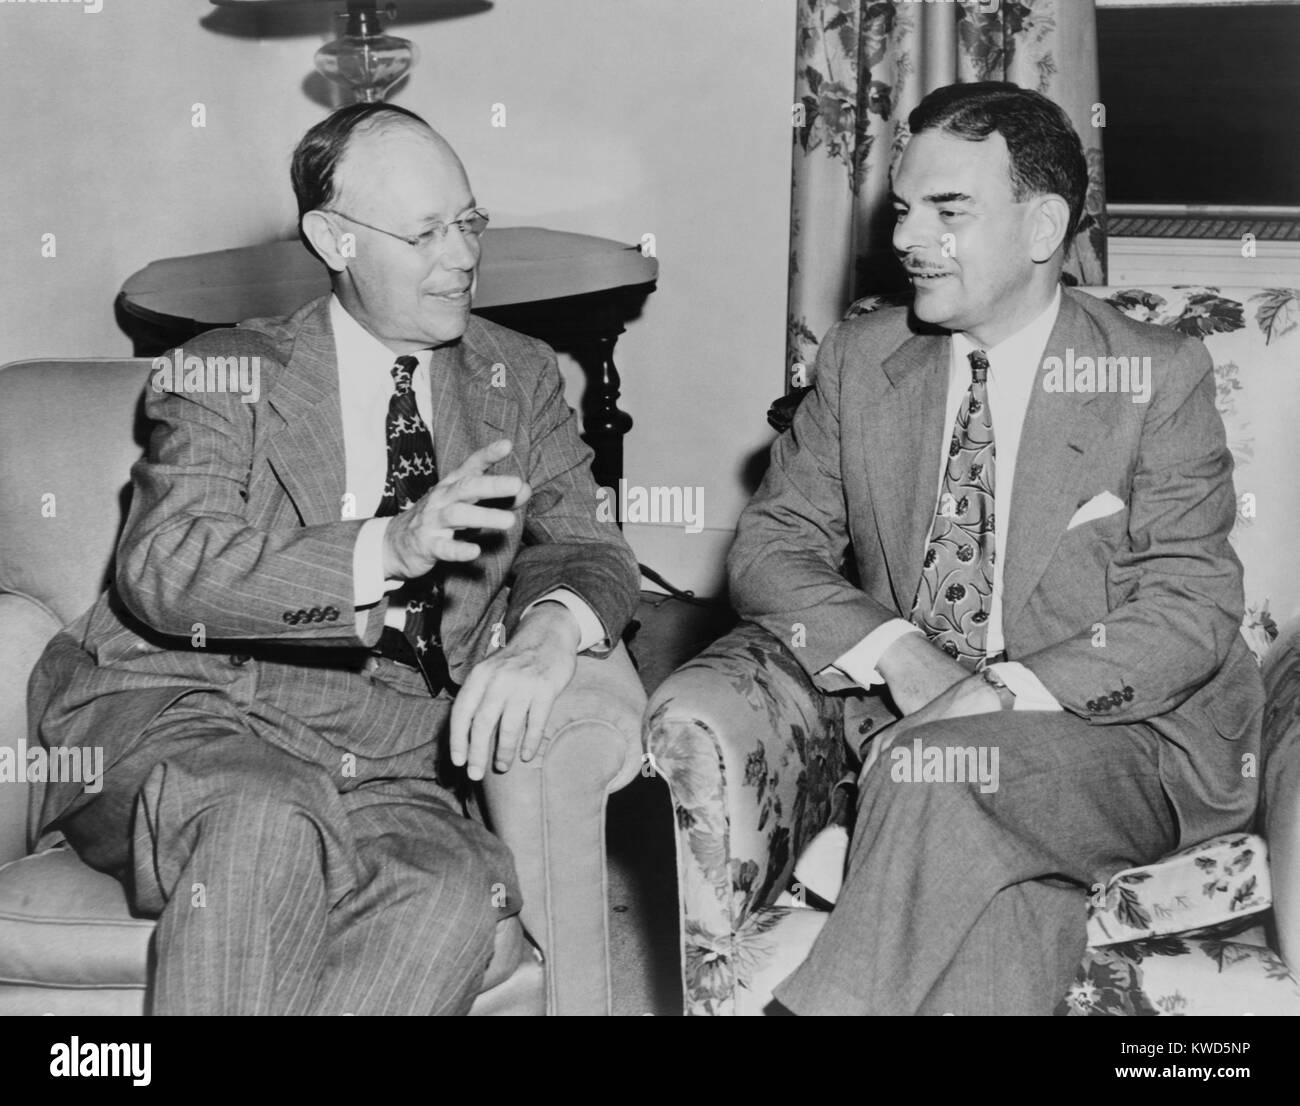 New York Governor Thomas Dewey and Senator Robert Taft at the Hotel Roosevelt in New York. June 1948. They were rivals for the Republican Presidential nomination in the 1940. (BSLOC 2014 13 34) Stock Photo